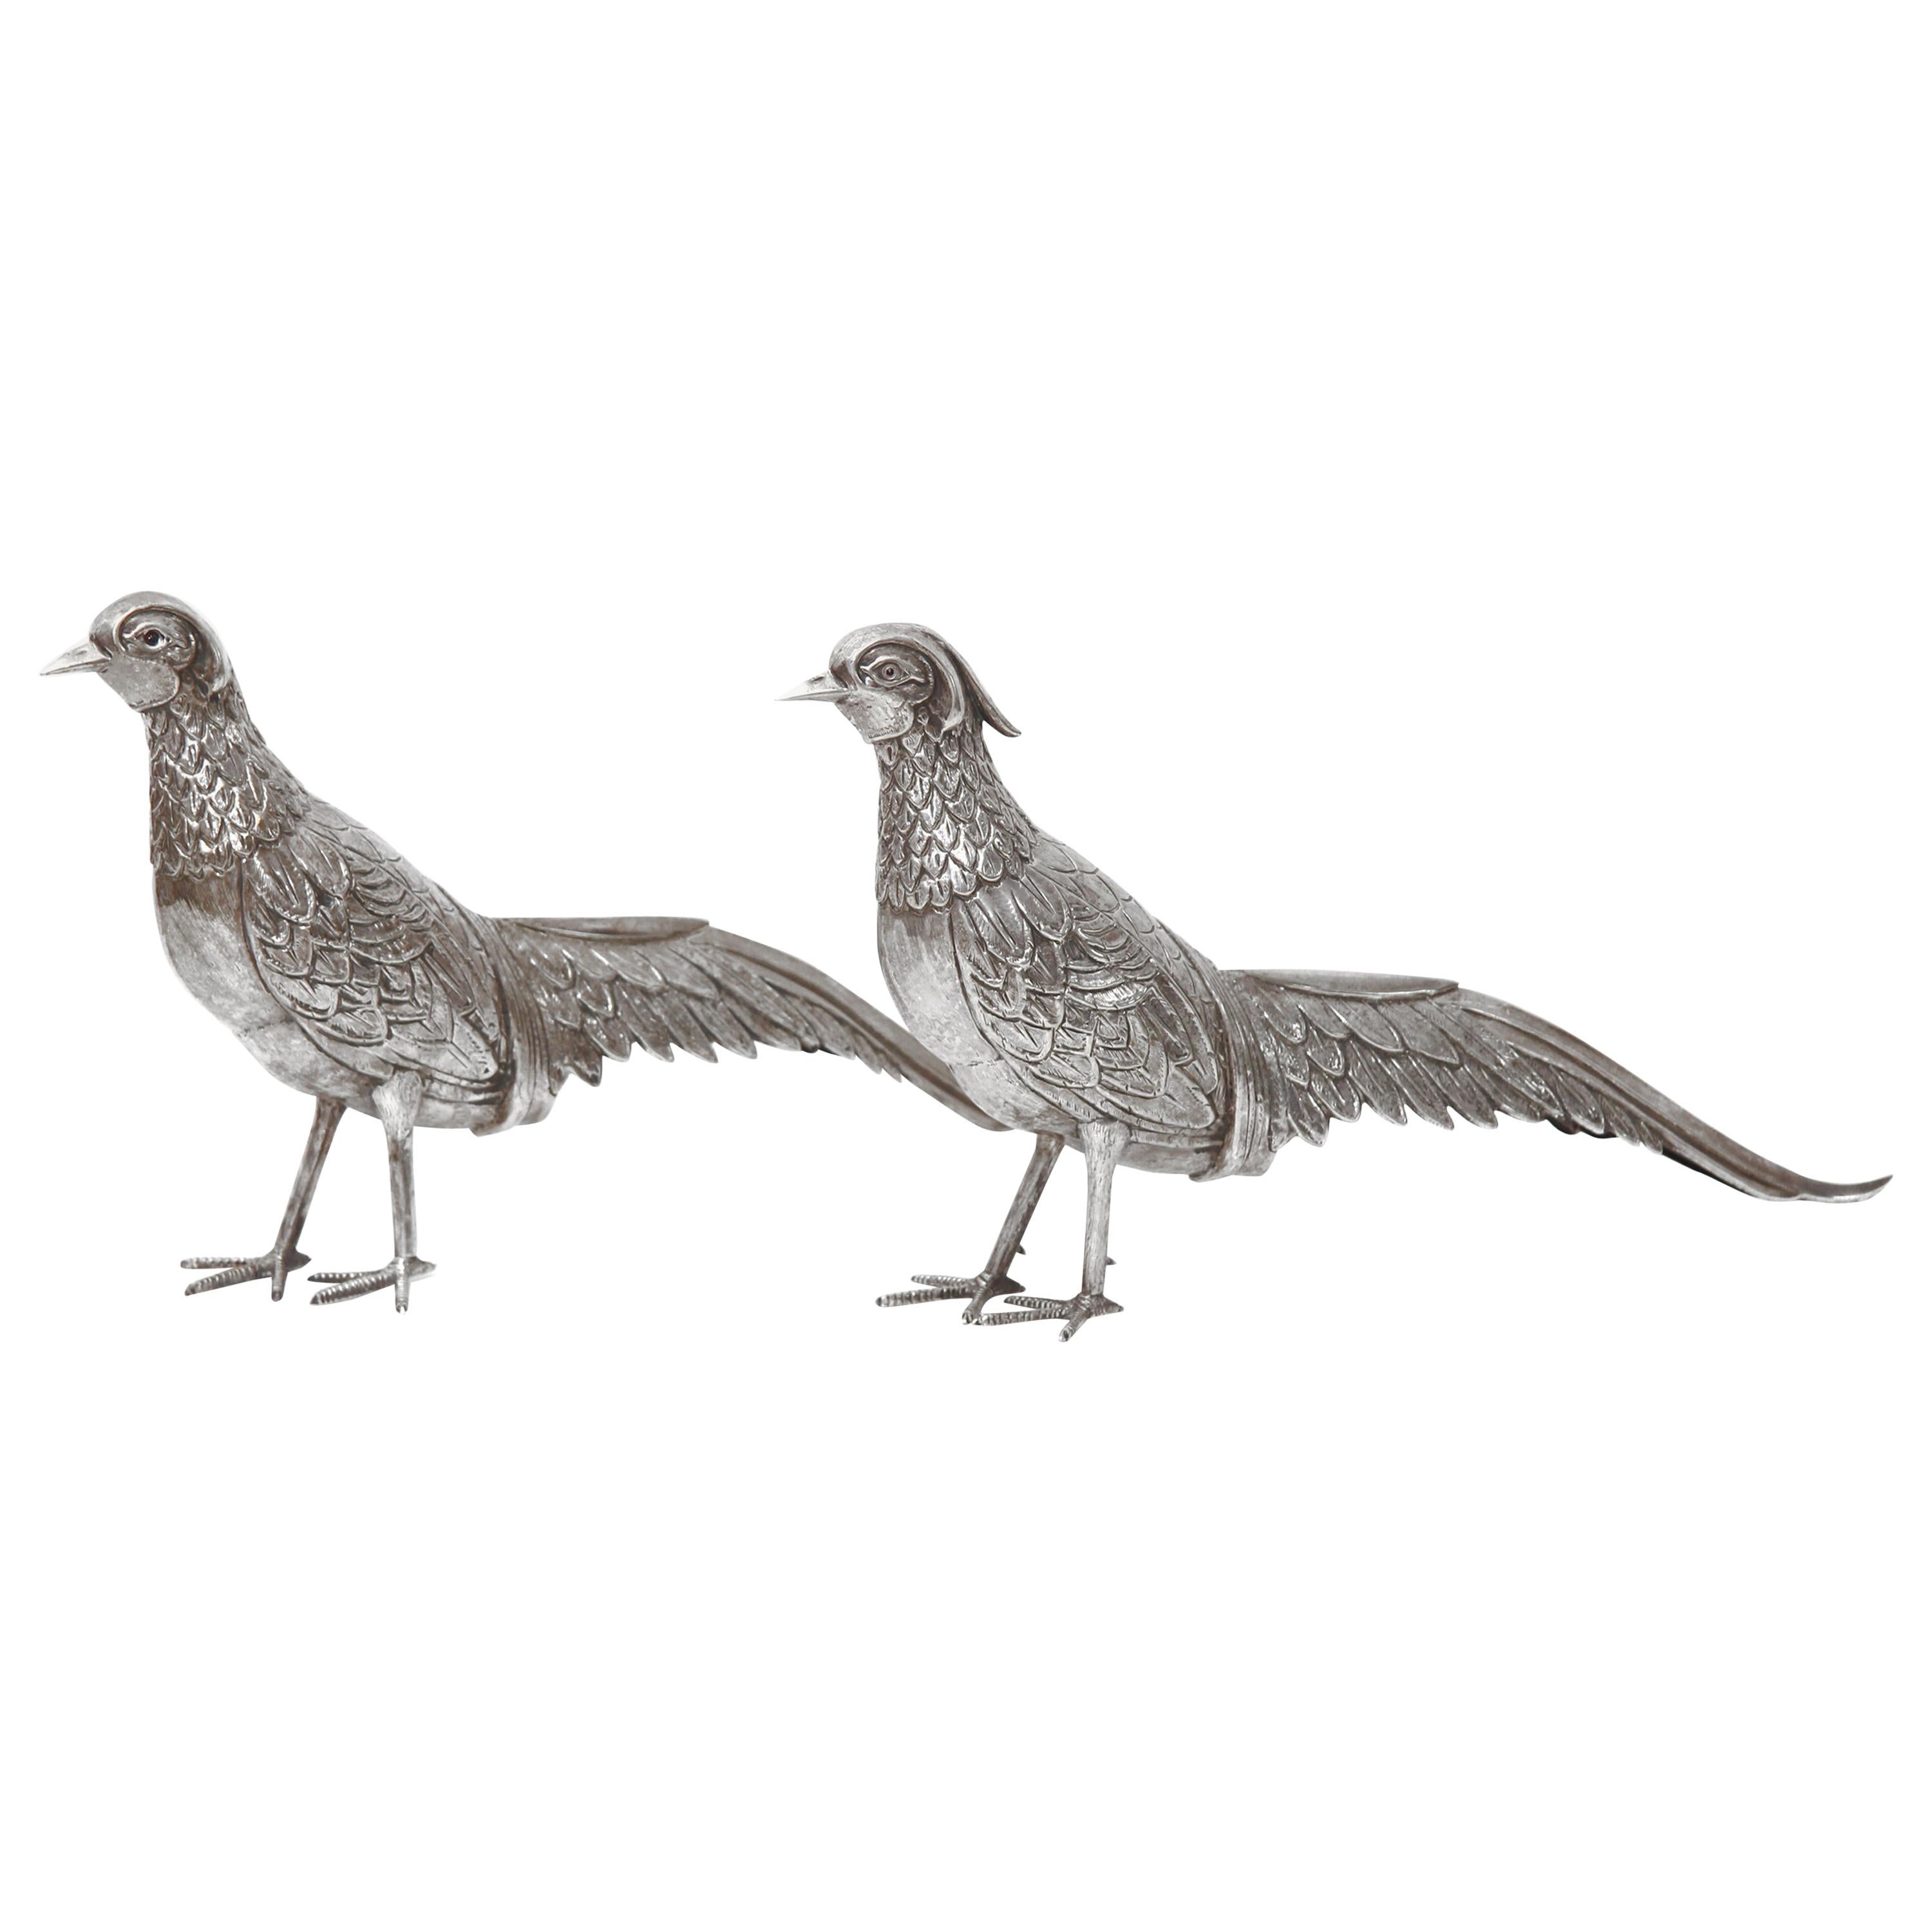 Fine Art Nouveau Silver Pheasants from Austria, Vienna Driven by Hand, Chased